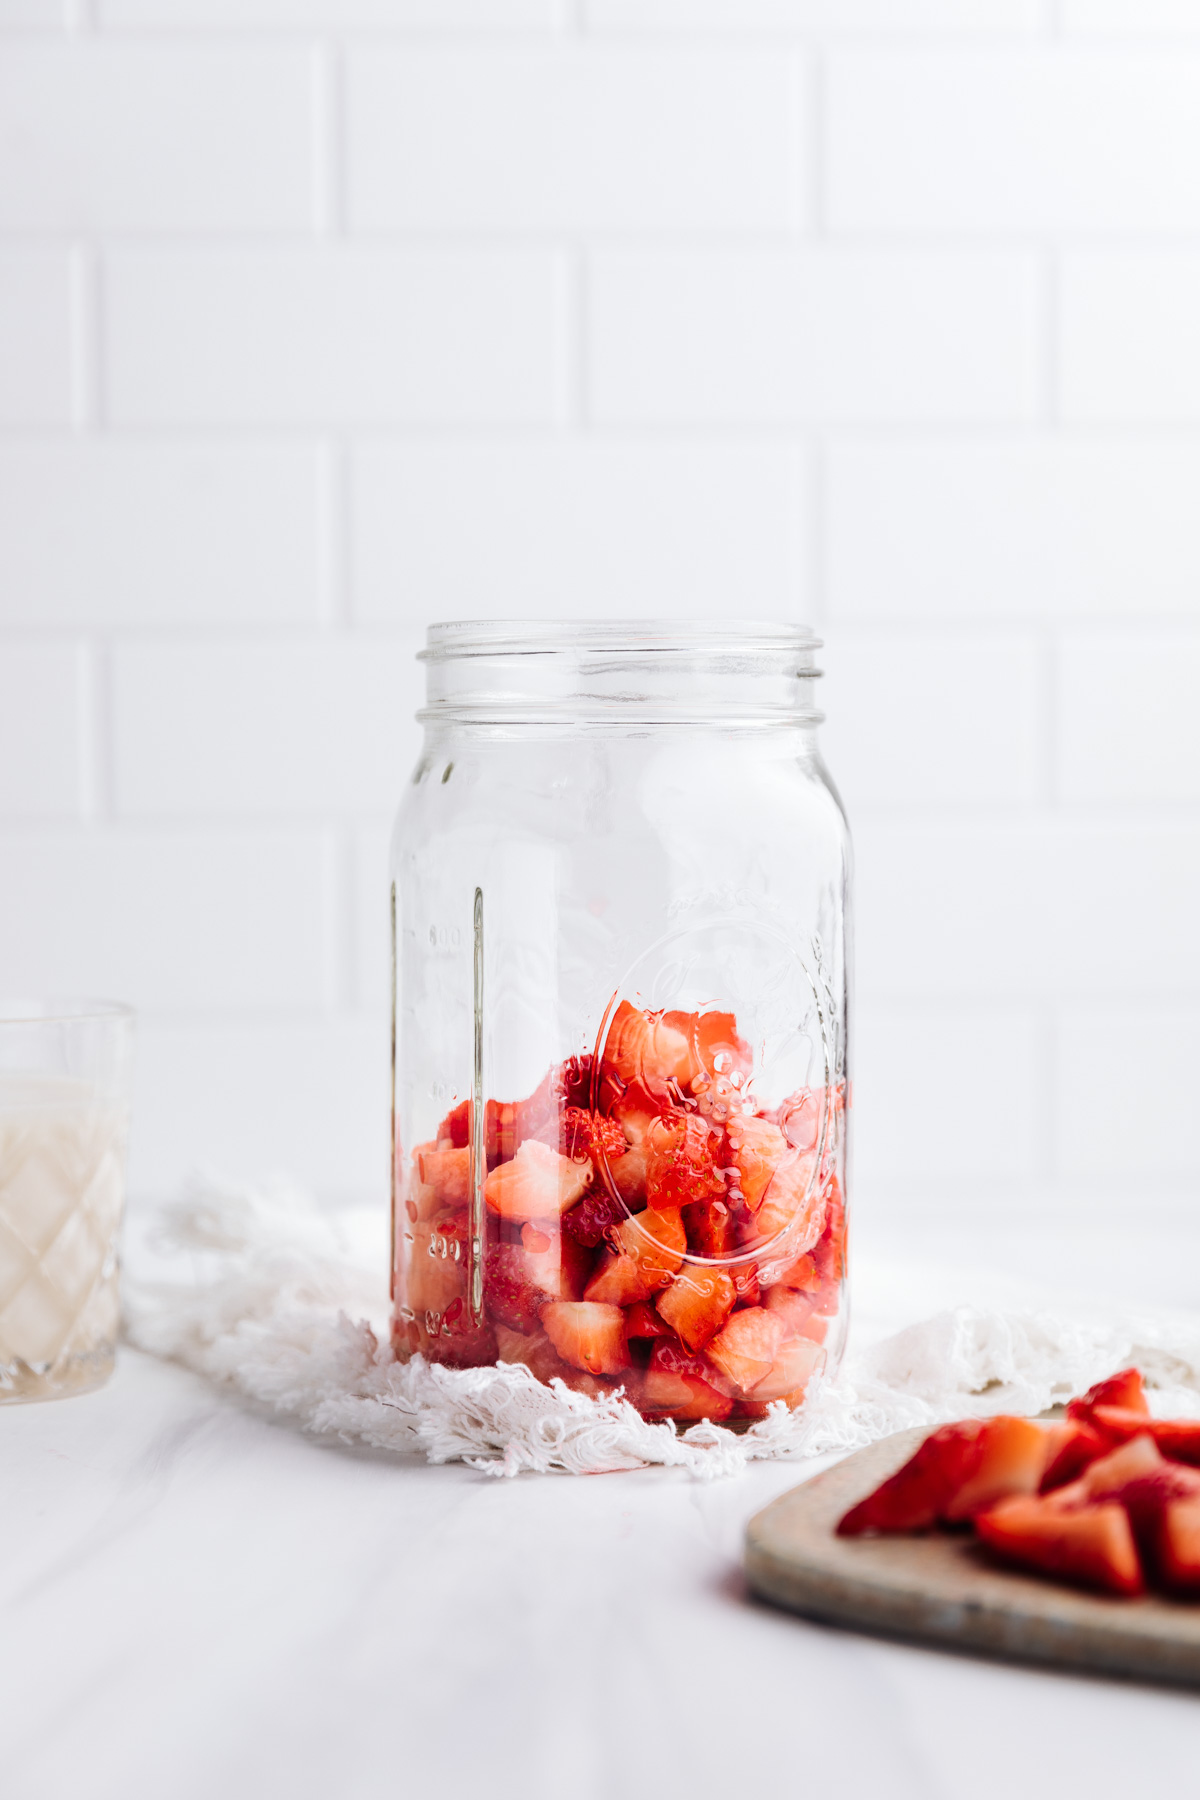 A glass jar with chopped strawberries on the bottom on a white backdrop